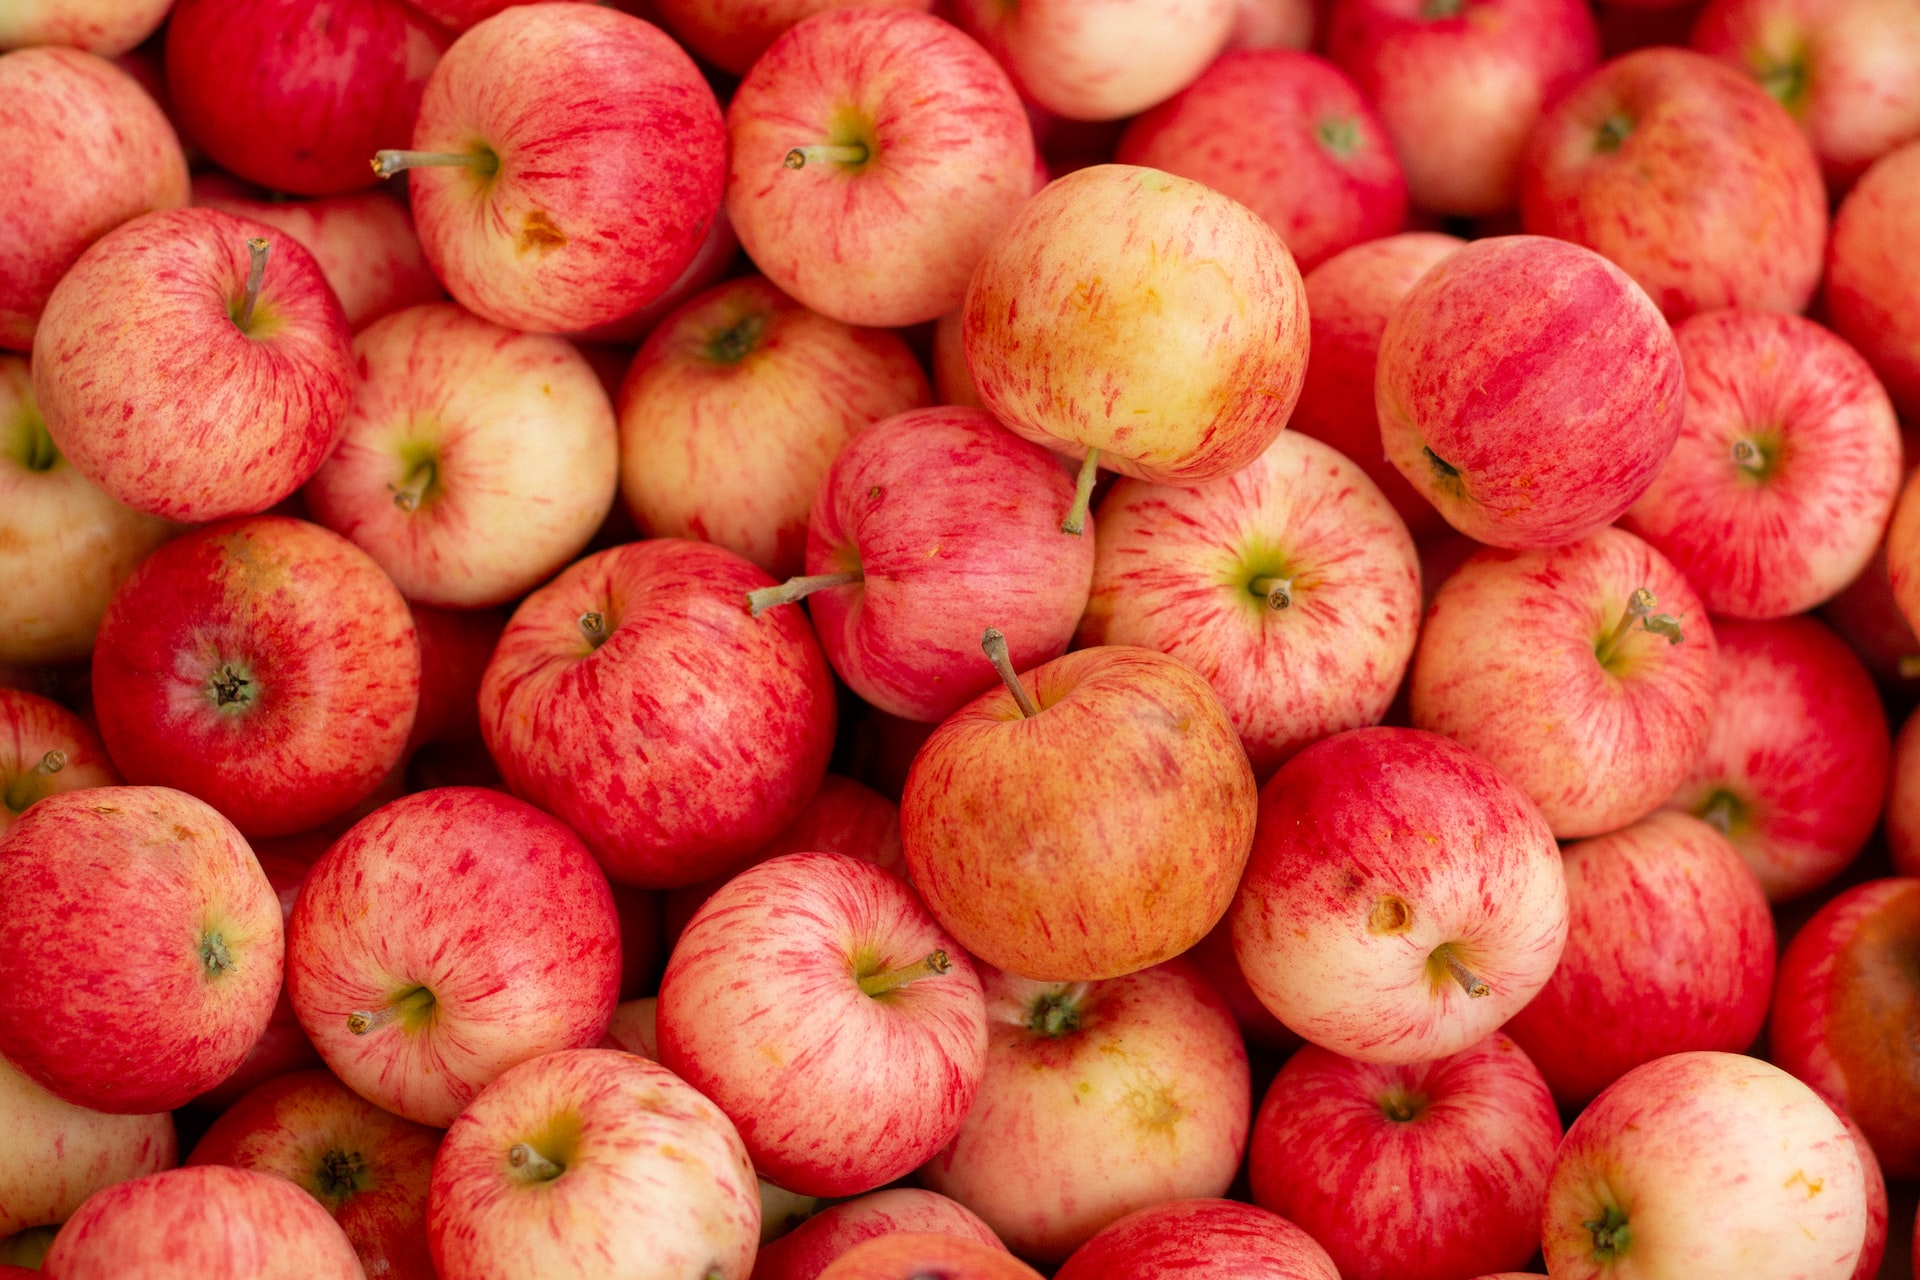 bunch of red apples - are apples good for teeth